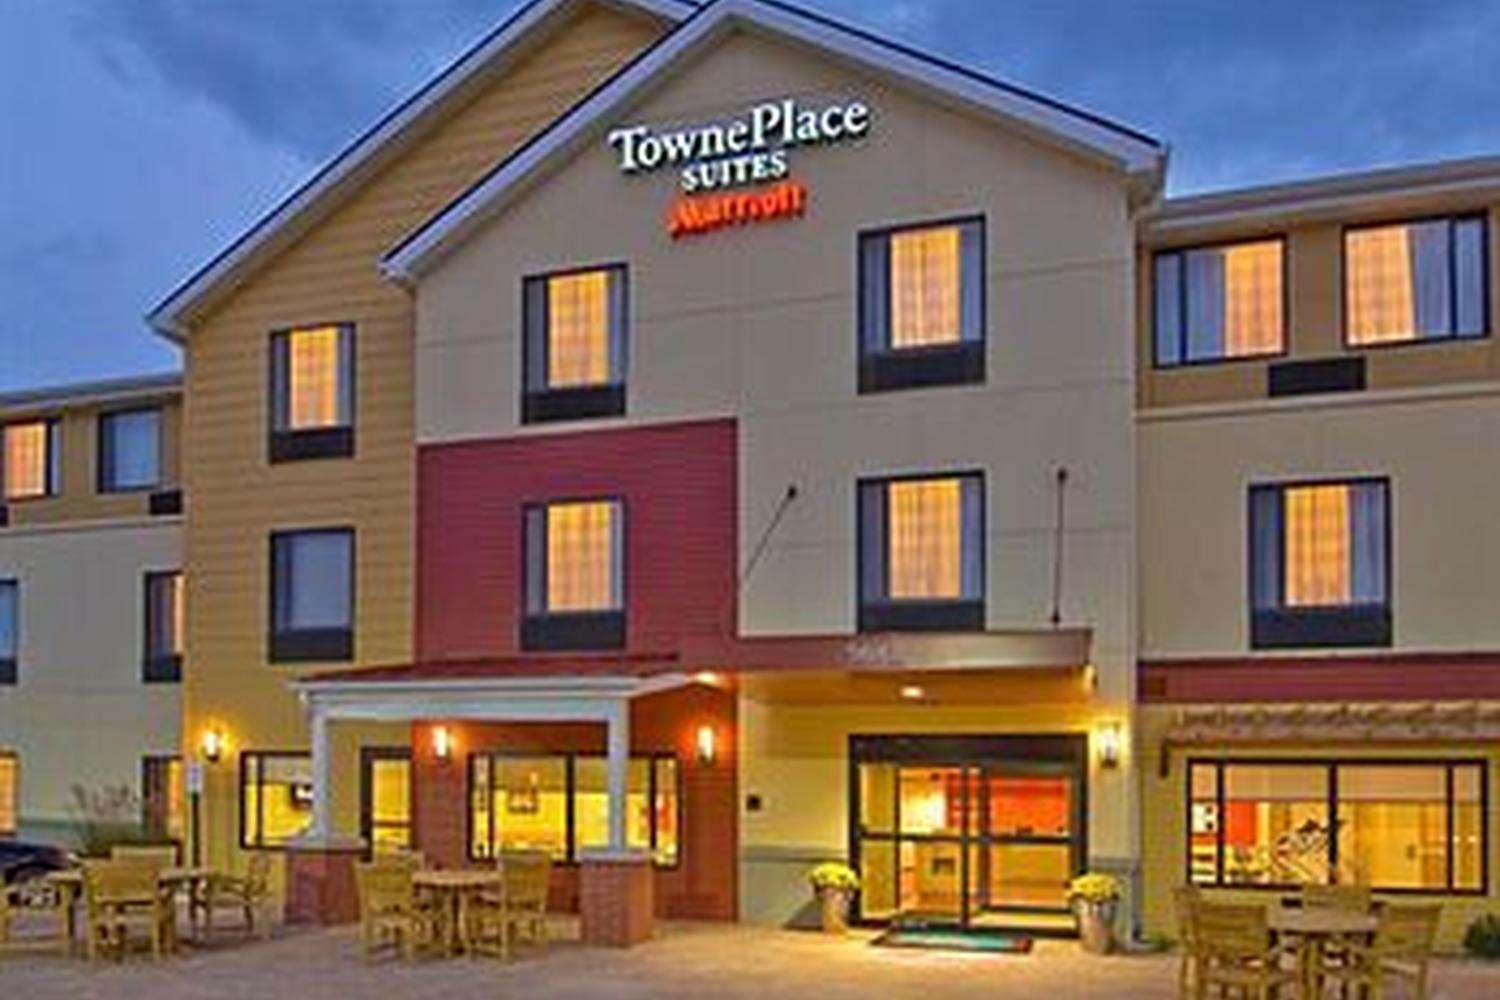 TownePlace Suites Marriott Kalamazoo Pet Policy